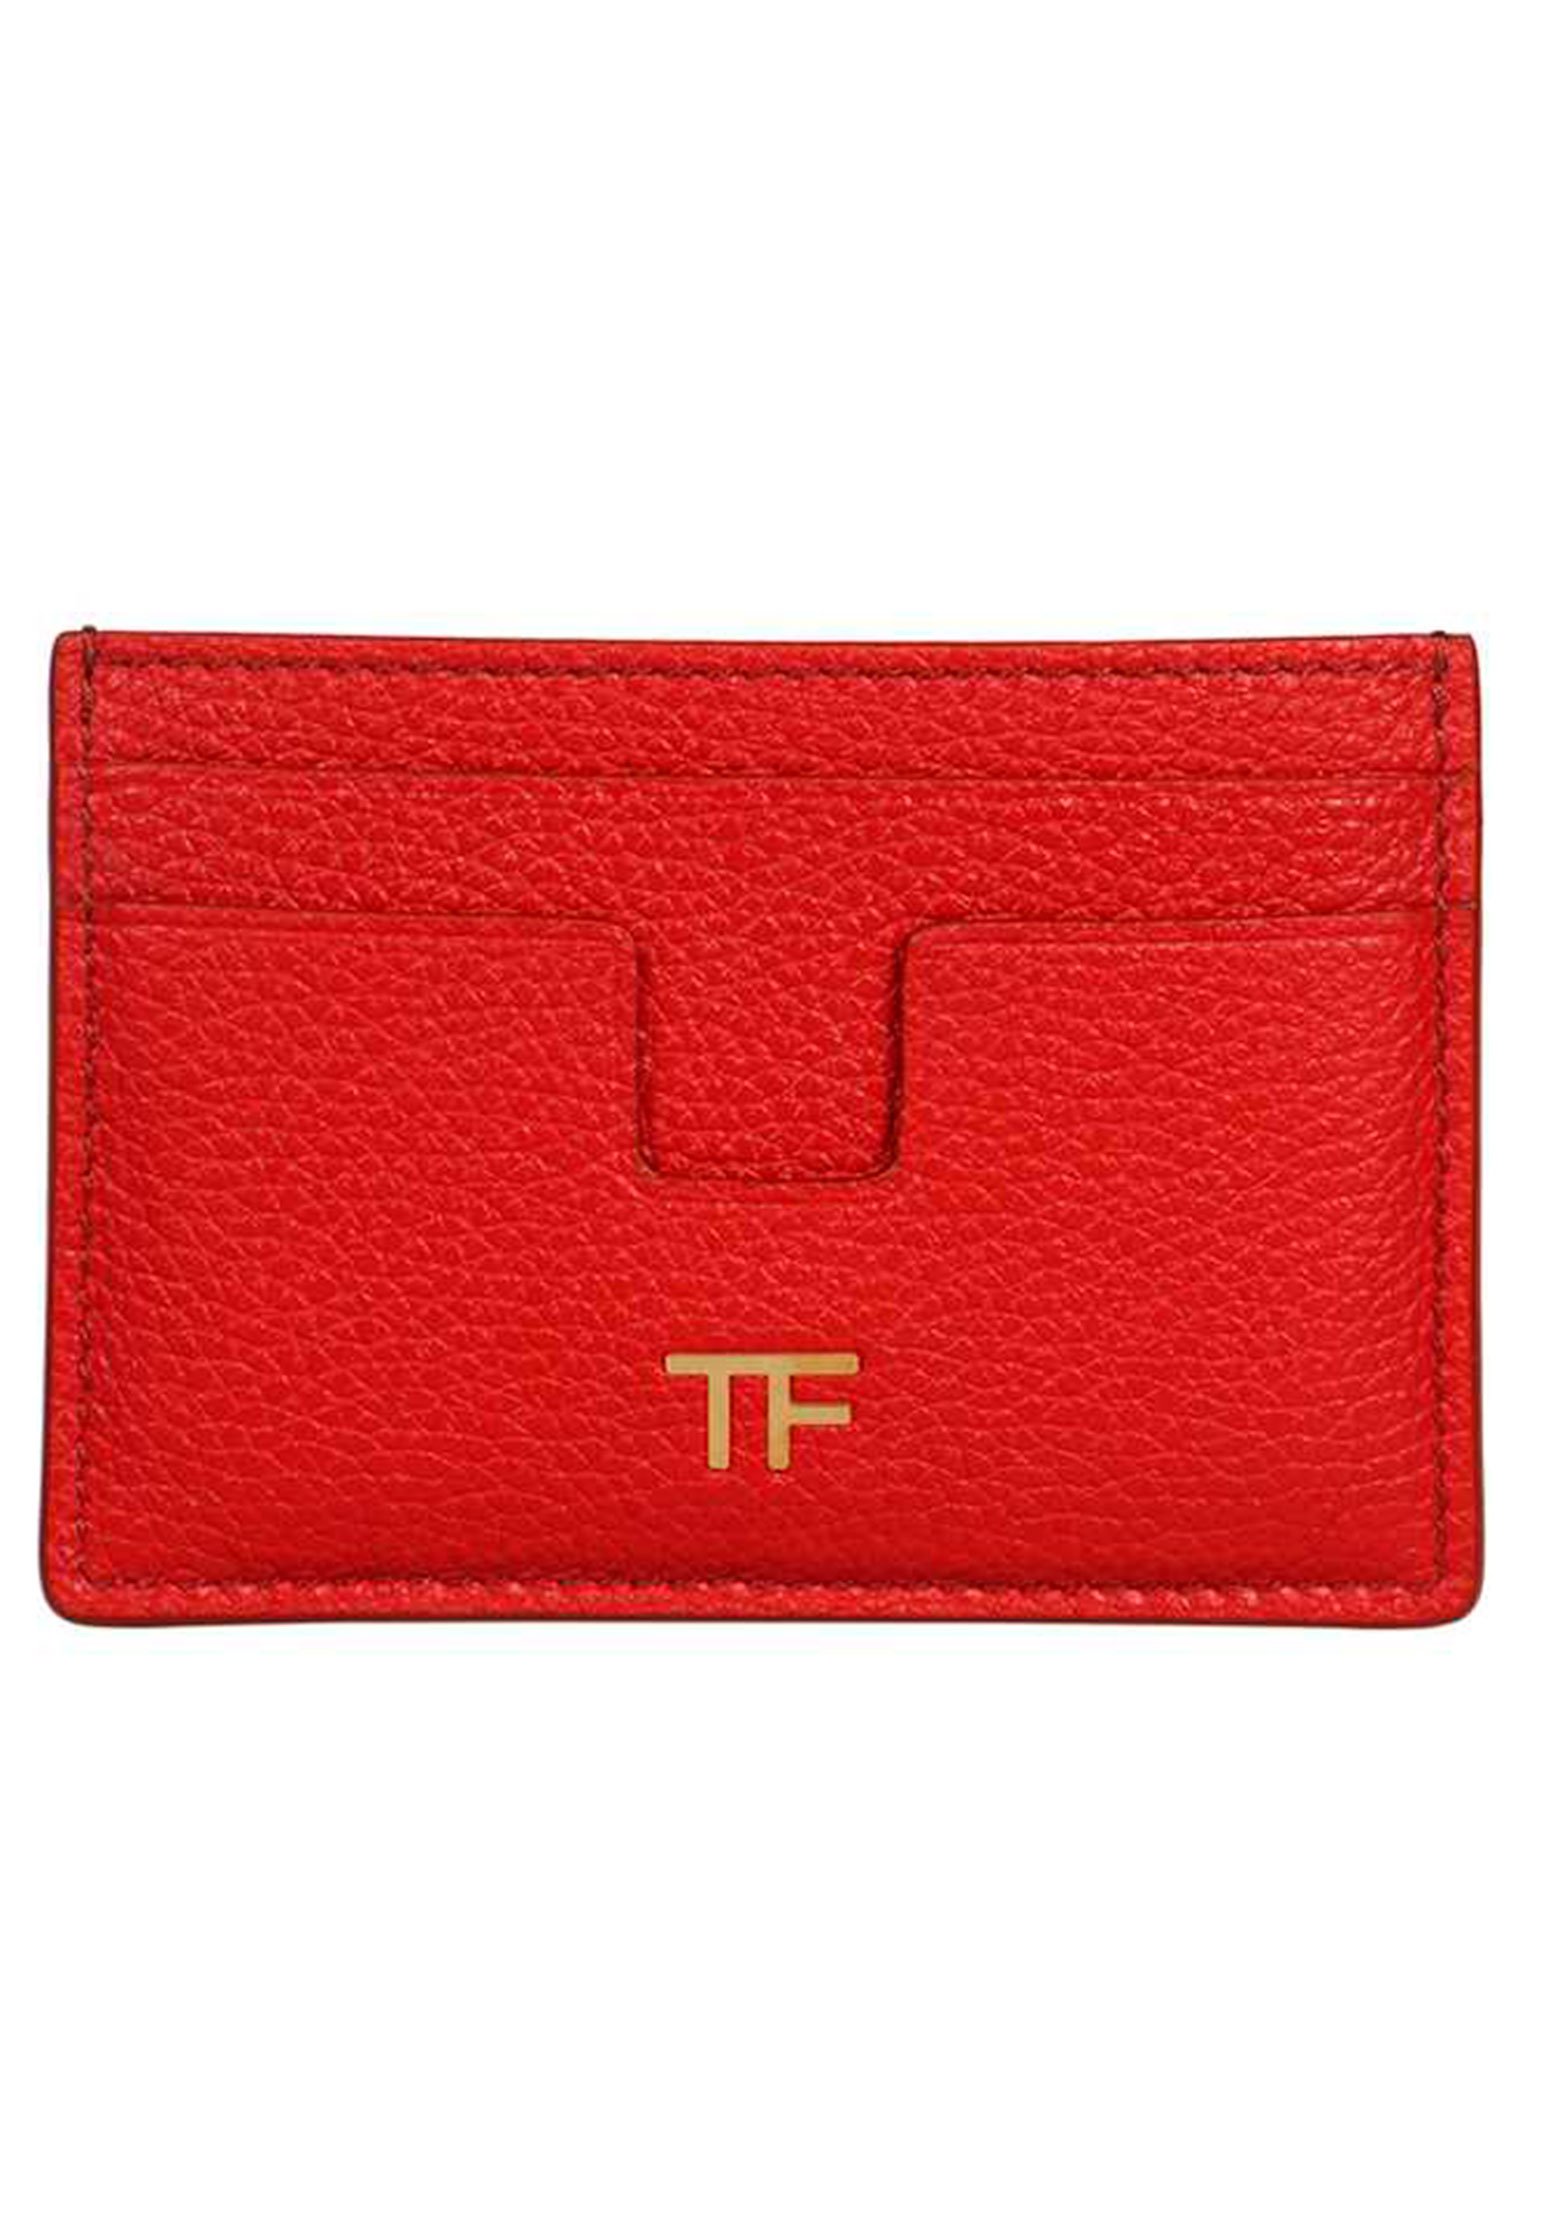 Card Holder TOM FORD Color: red (Code: 1095) in online store Allure